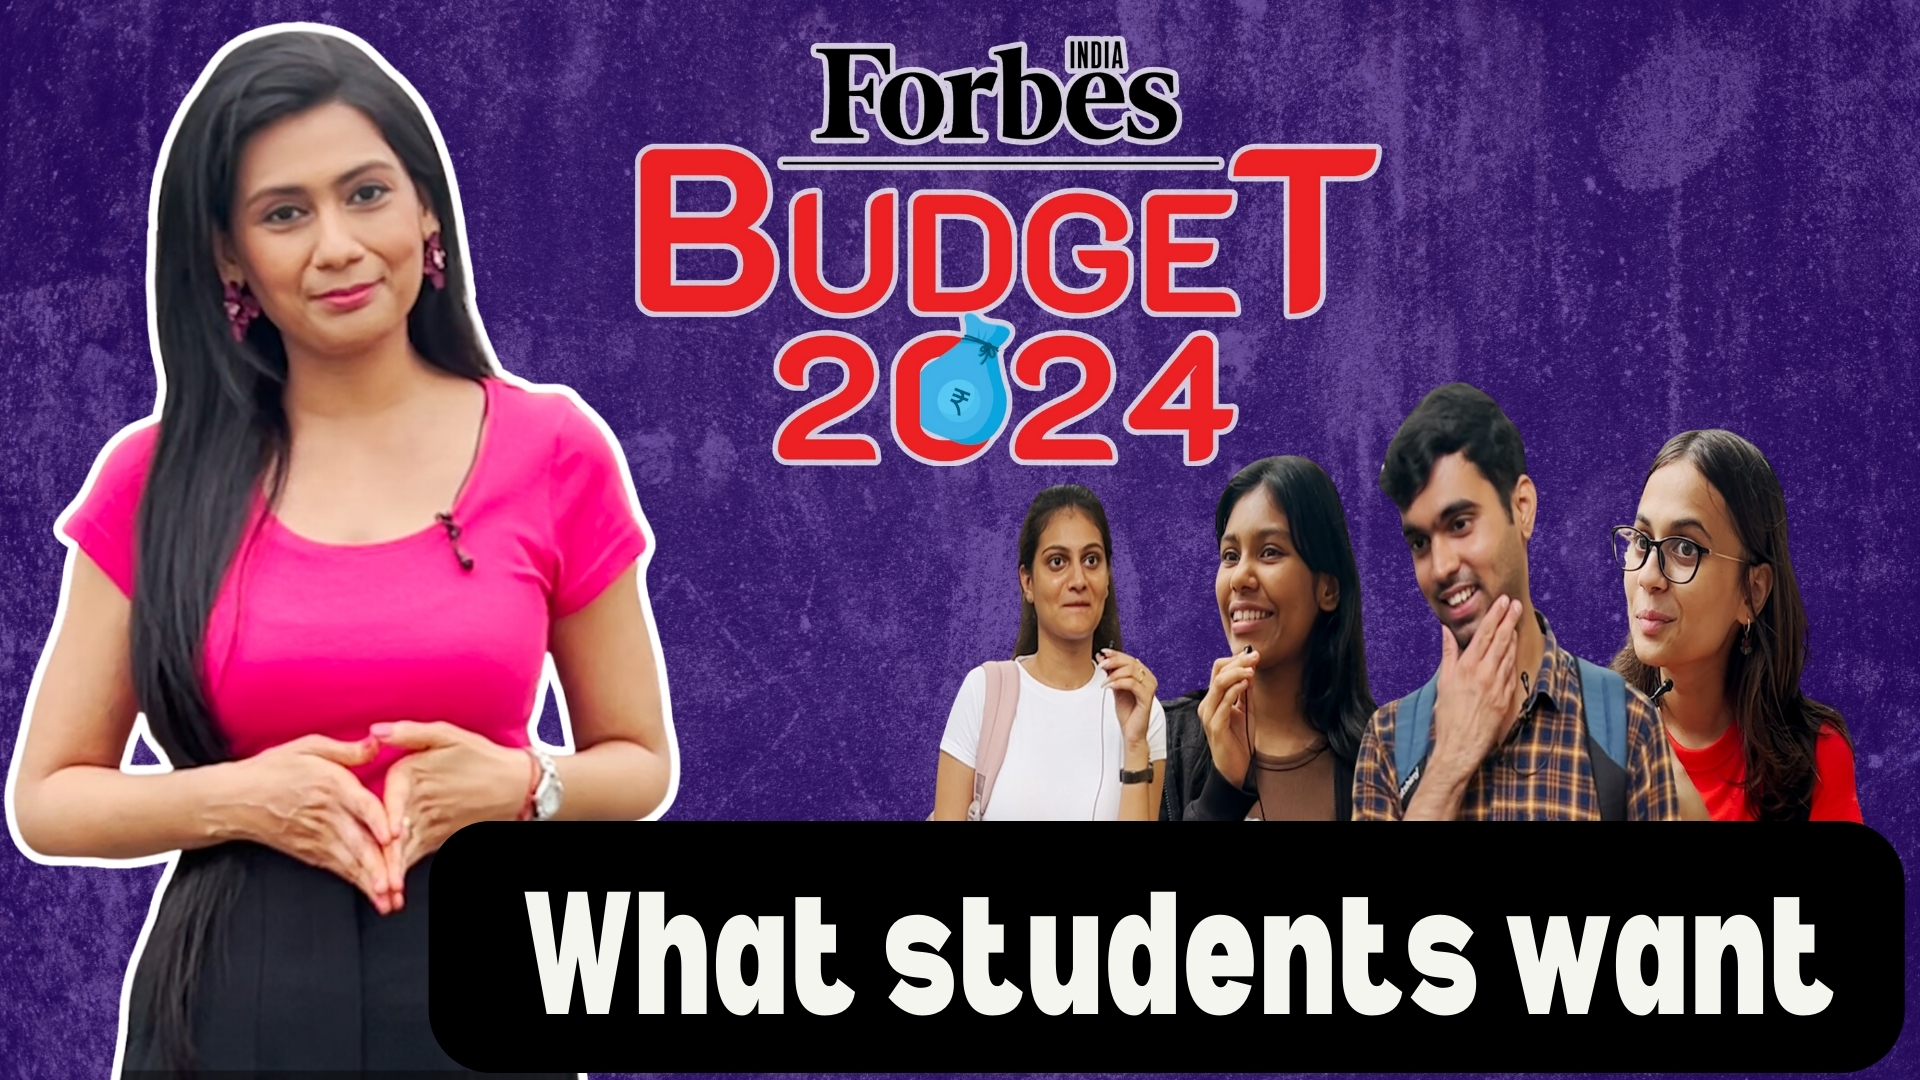 Budget 2024: What do students want?